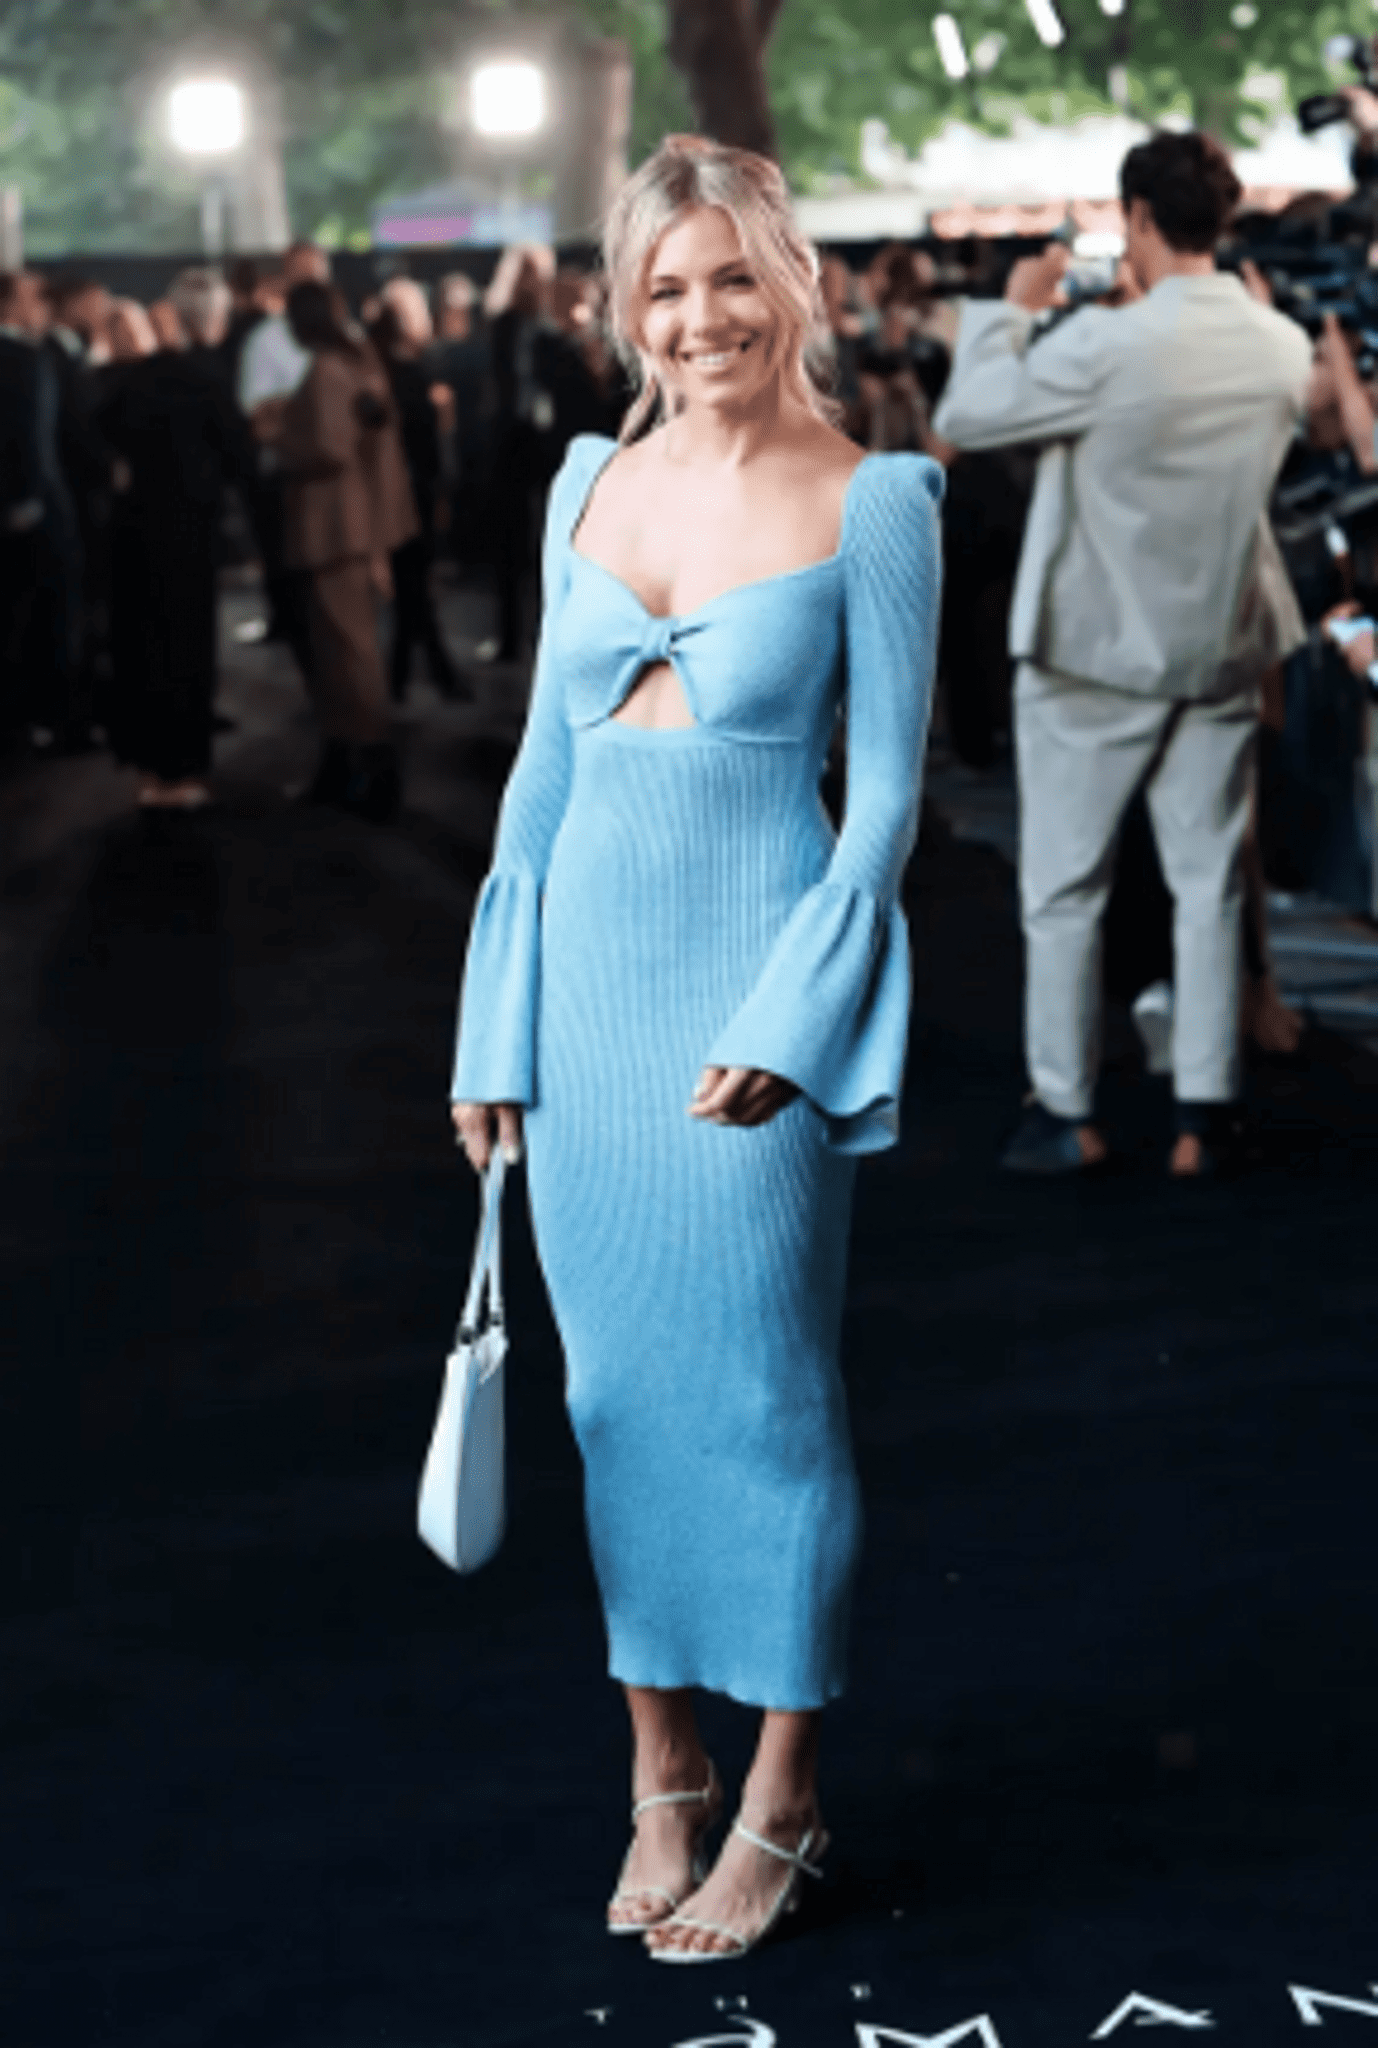 Cutout Dresses Continue To Be Popular. Sienna Miller Affirmed It